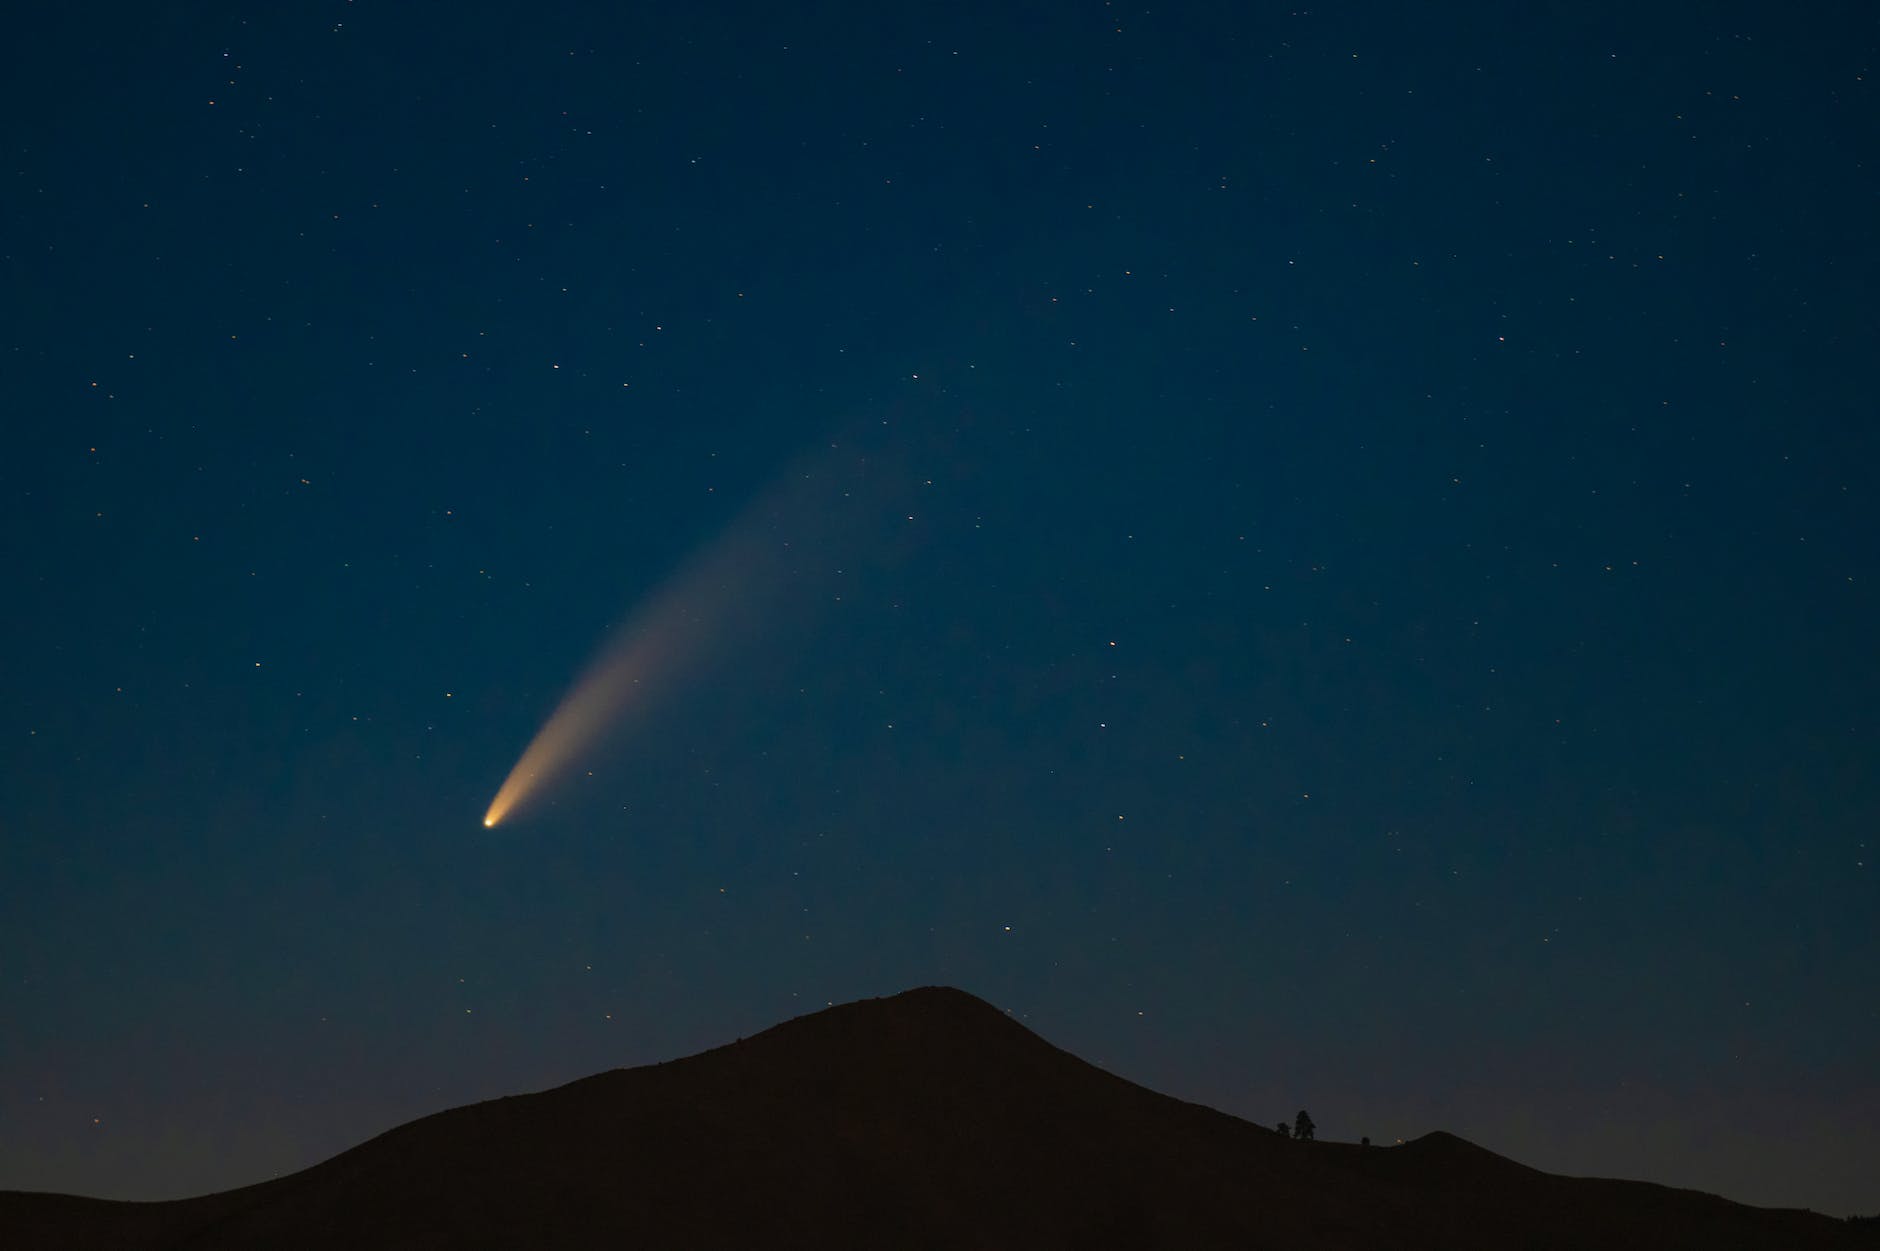 night shot of a mountain and comet in sky